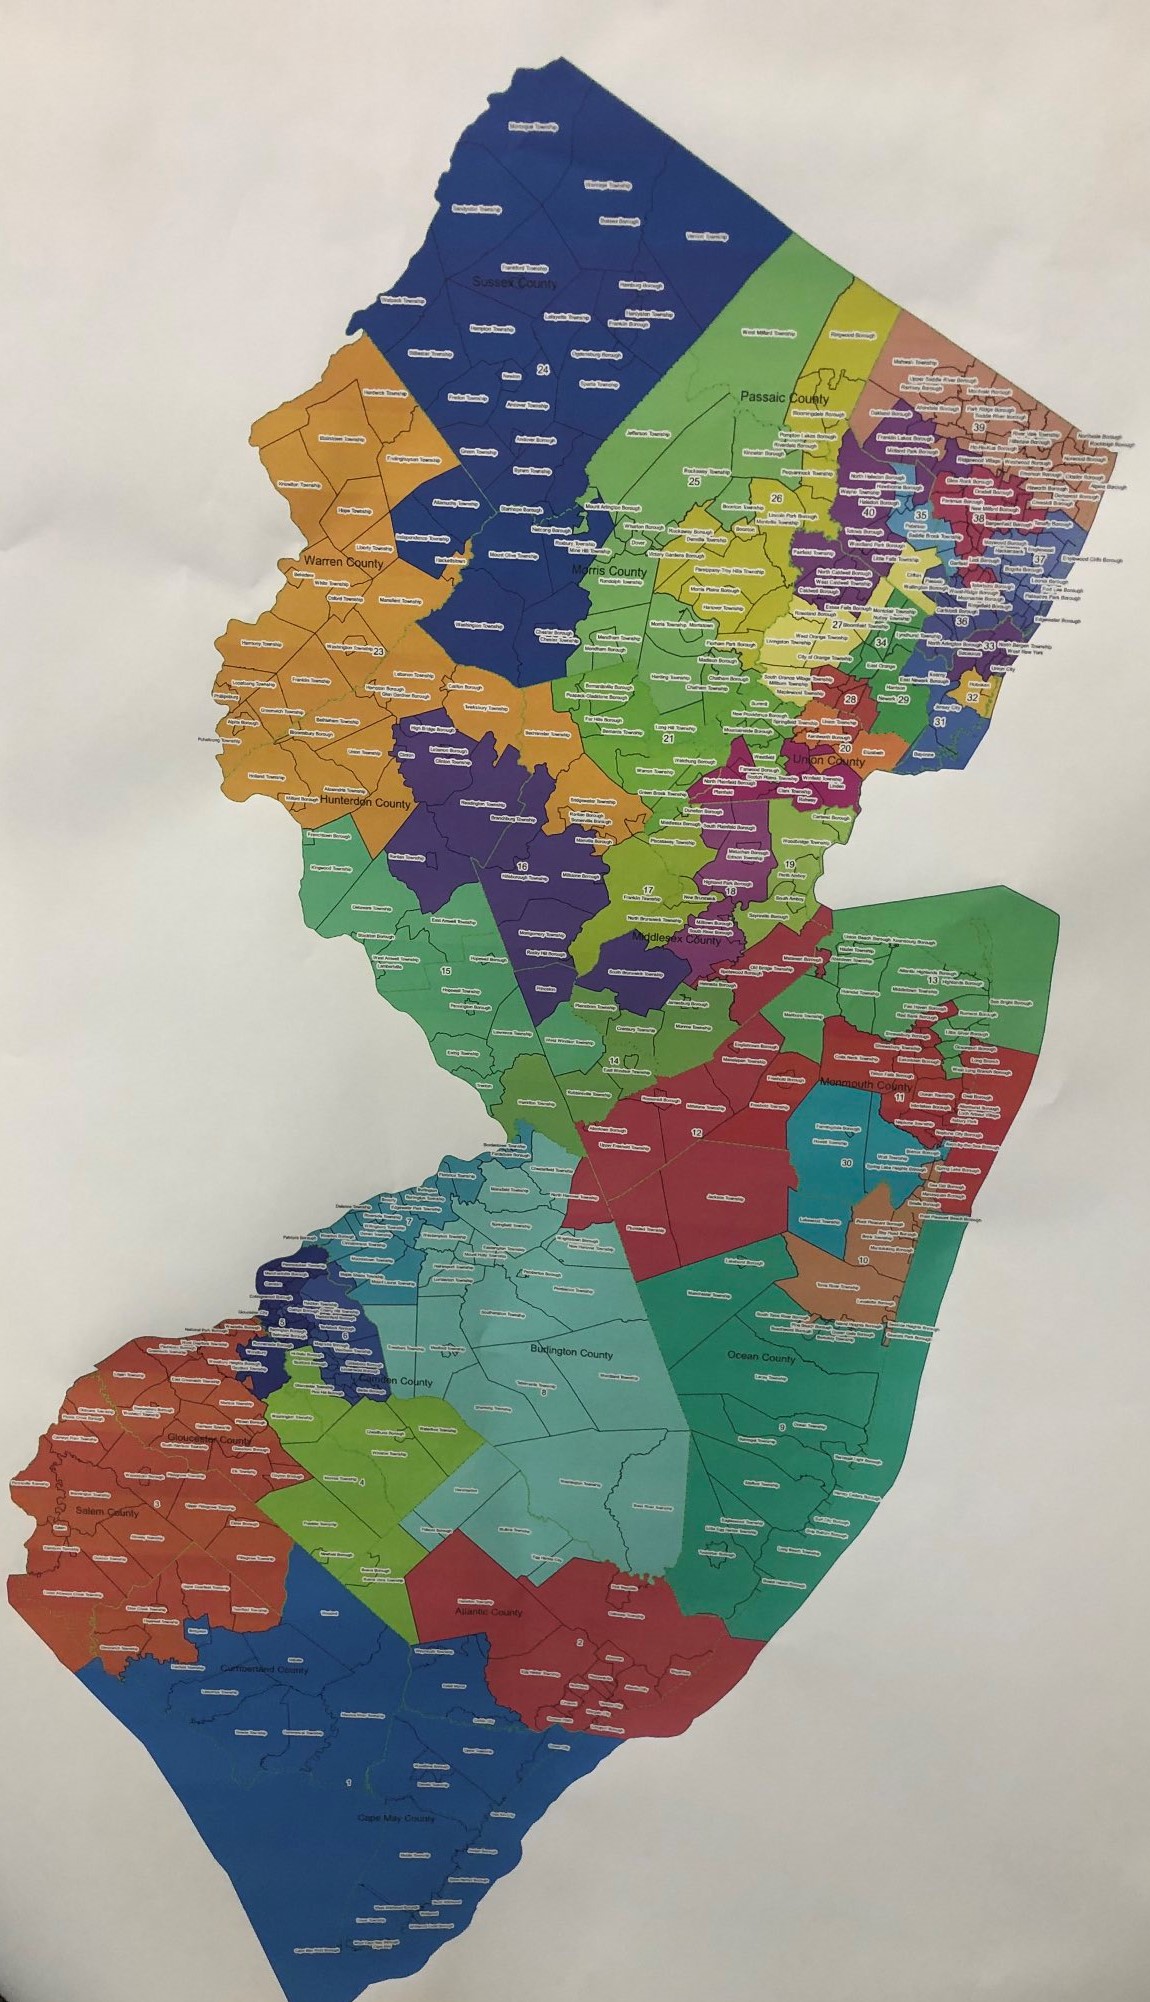 The new redistricting map.